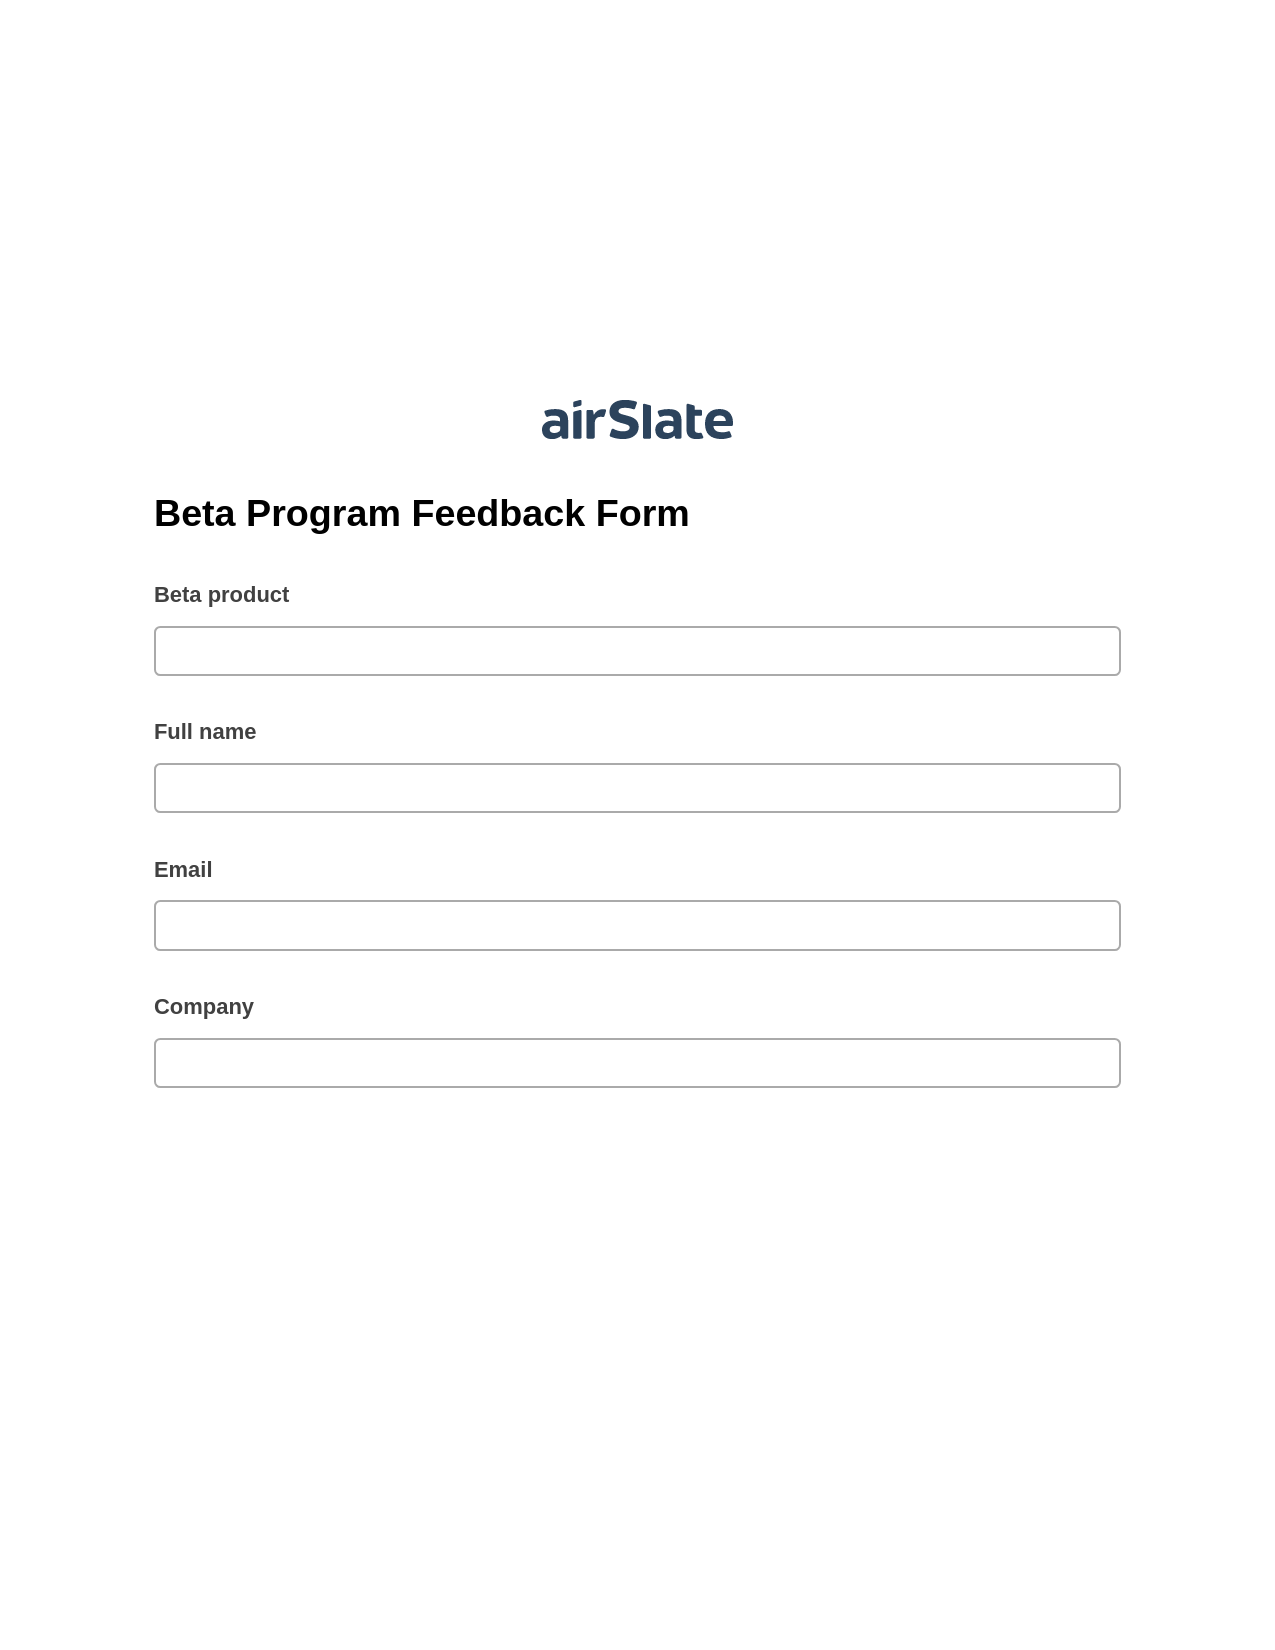 Multirole Beta Program Feedback Form Pre-fill from another Slate Bot, Update Salesforce Record Bot, Email Notification Postfinish Bot